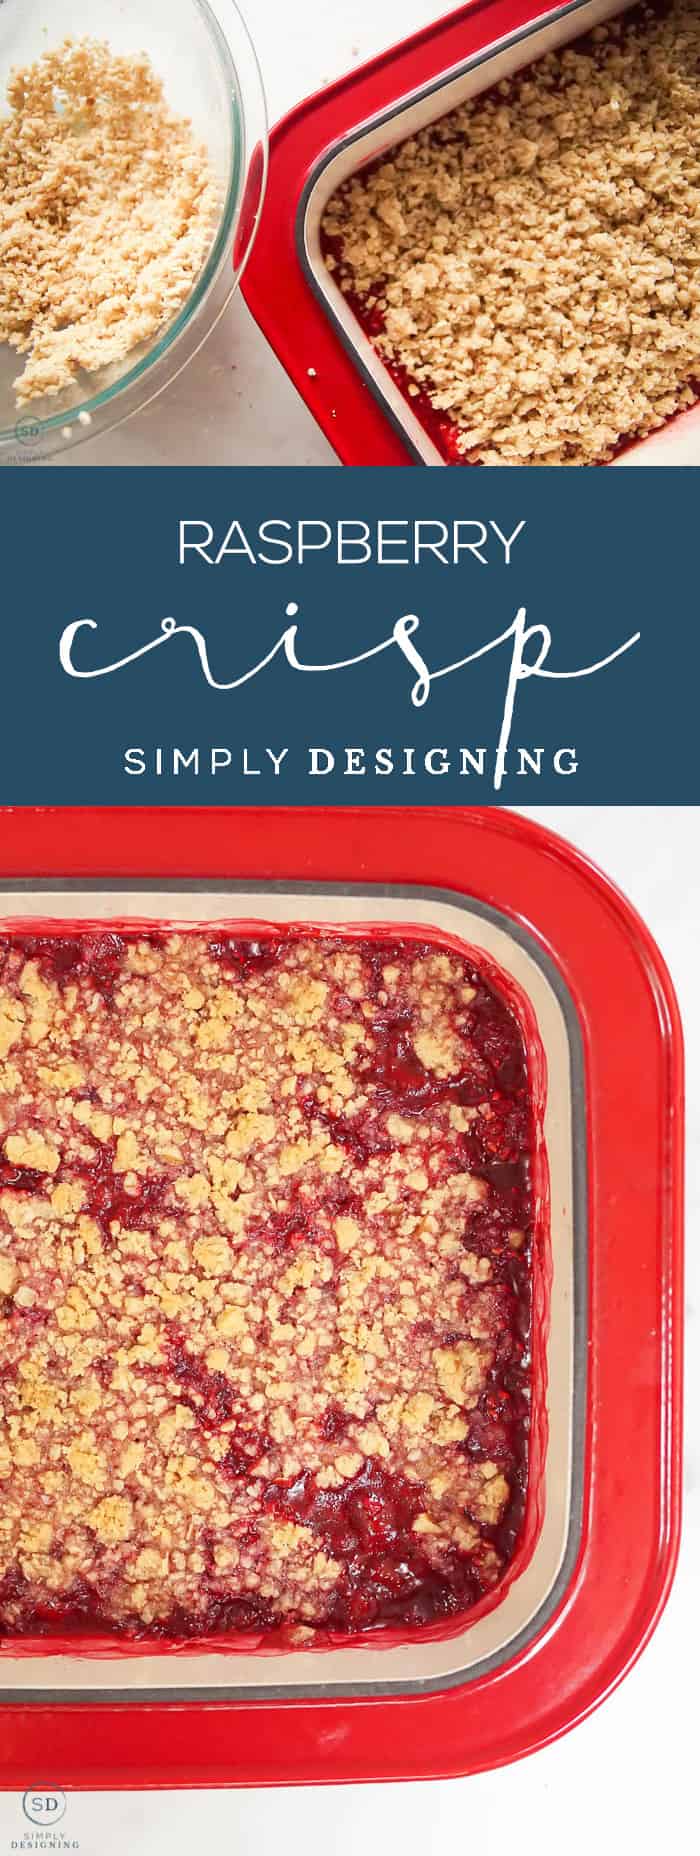 This delicious Raspberry Crisp recipe is the perfect way to enjoy fresh or frozen raspberries in yummy dessert form any time of the year